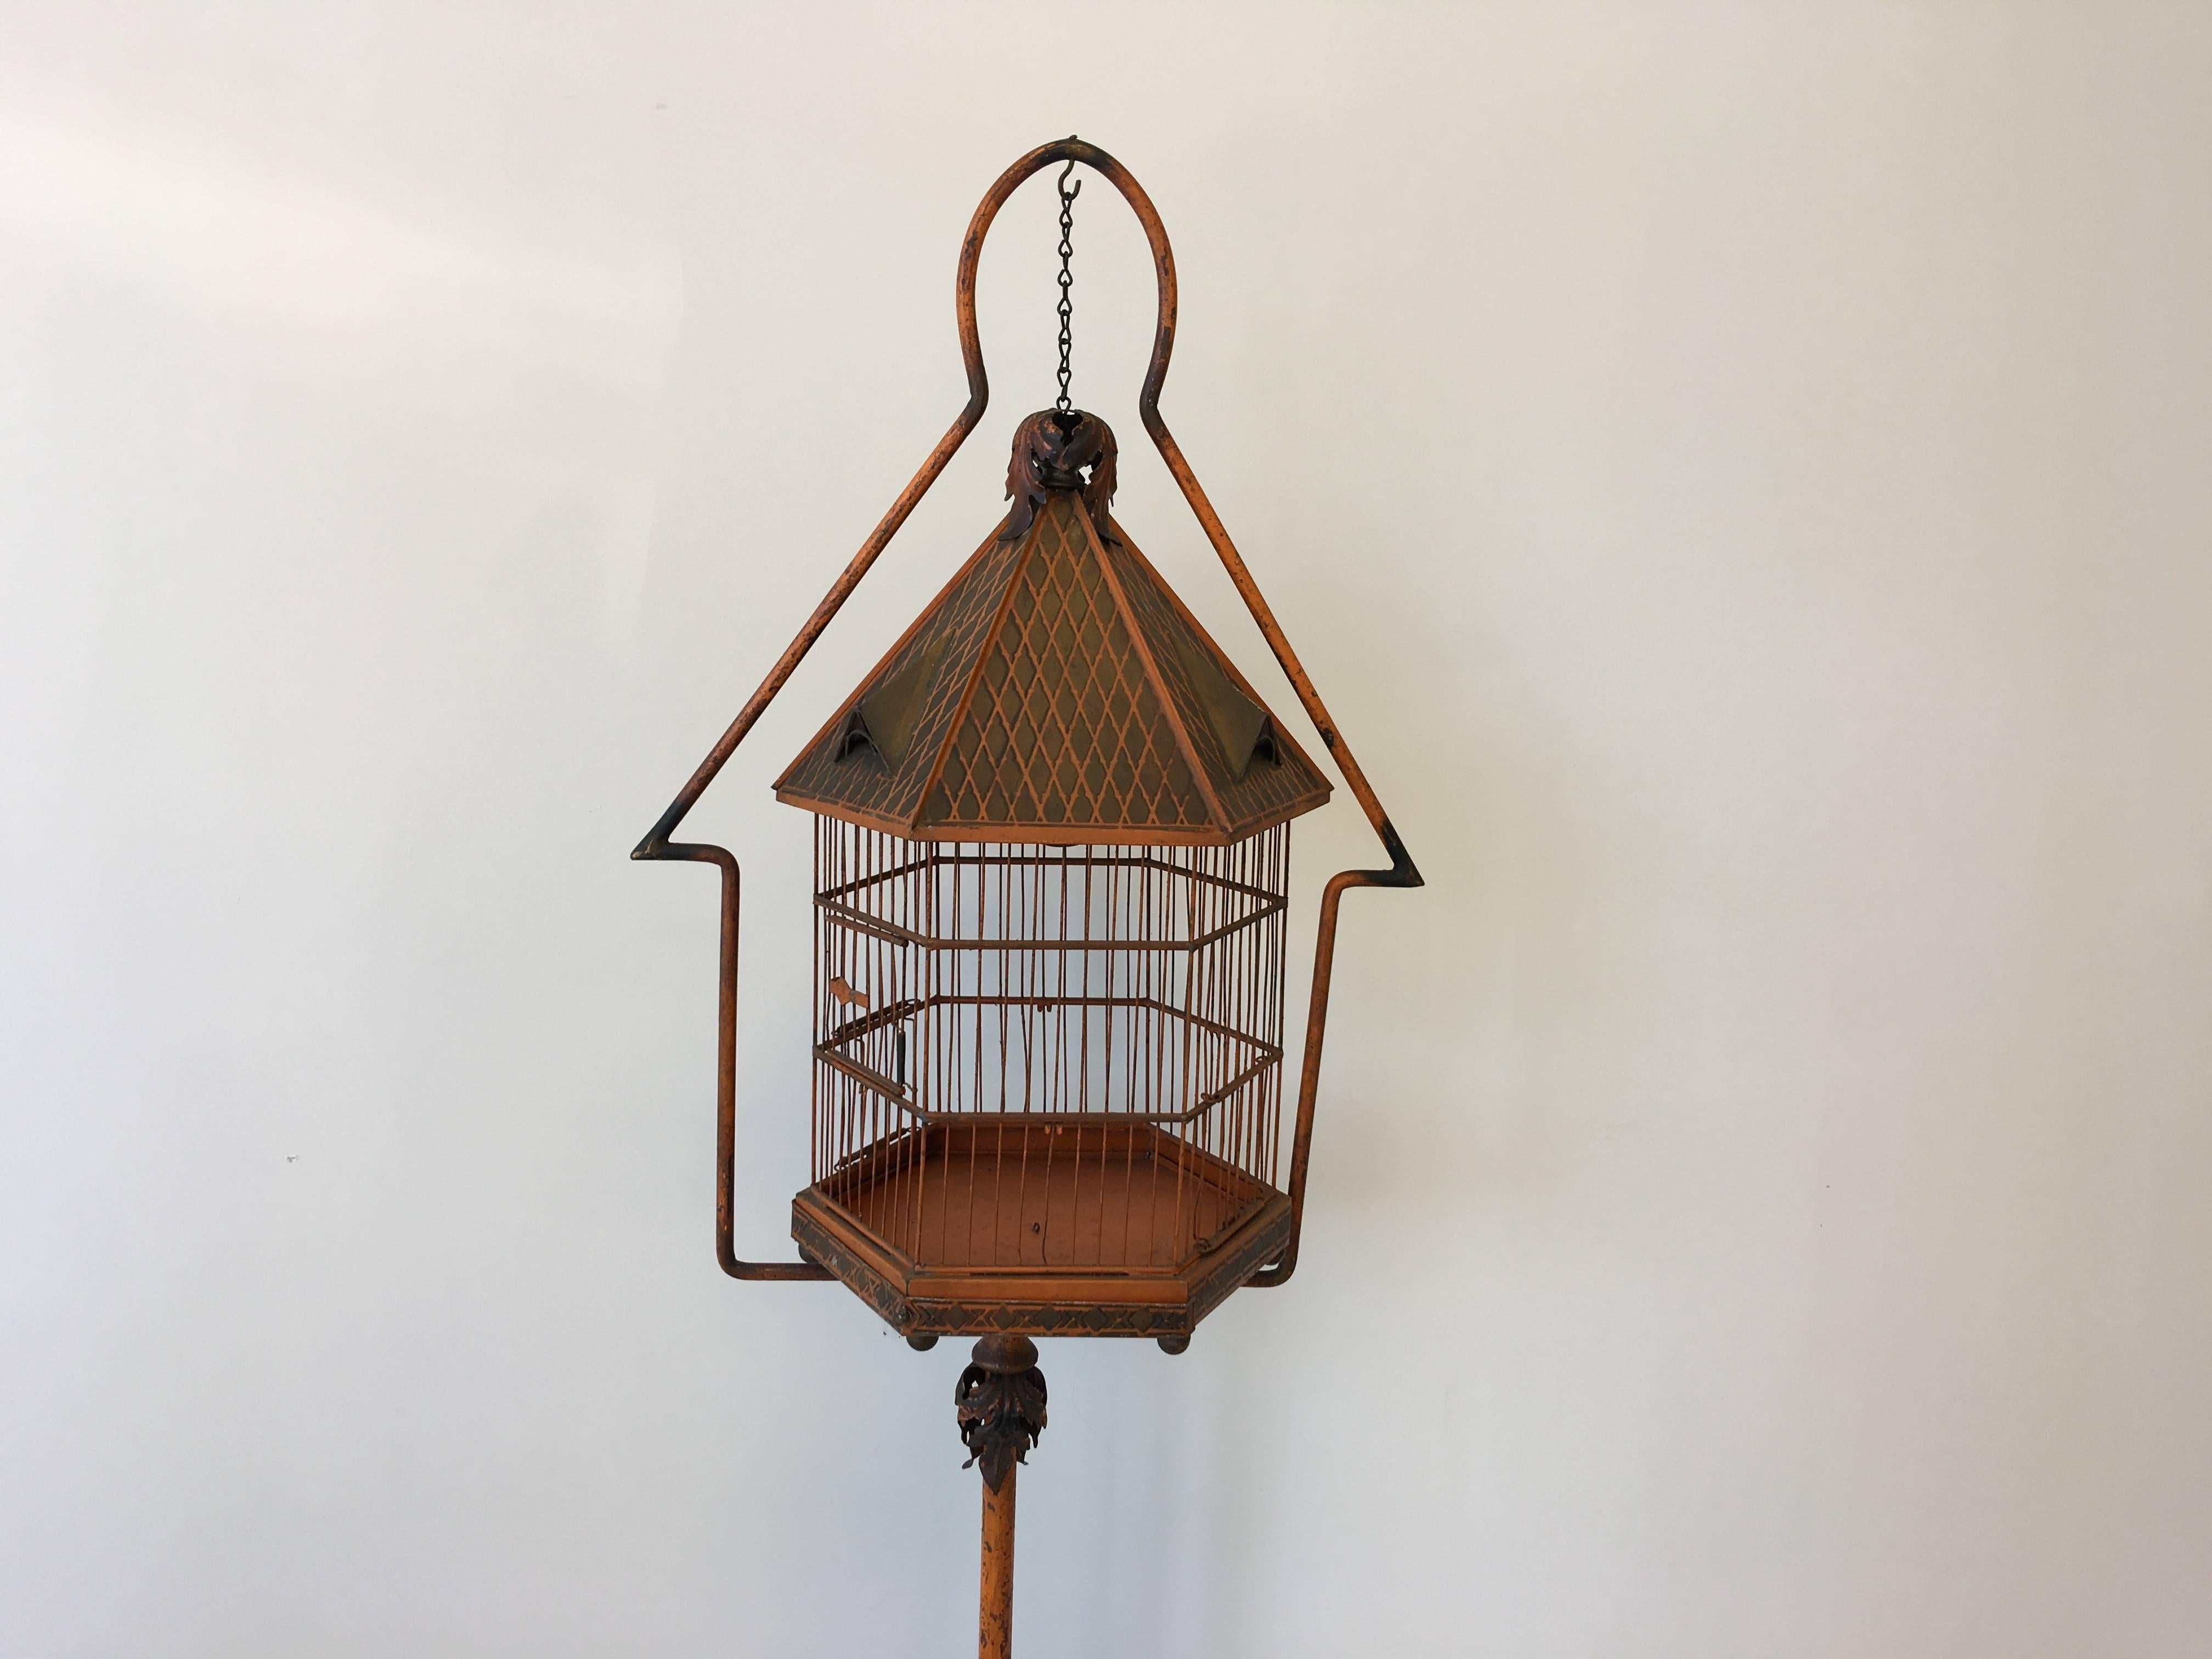 Offered is a beautiful, late 19th century tole orange and green painted birdcage and stand by P.N.F. Made in Czechoslovakia. Features shades of orange, green, and black. Three small windows along the roof, great fretwork along the base, and metal